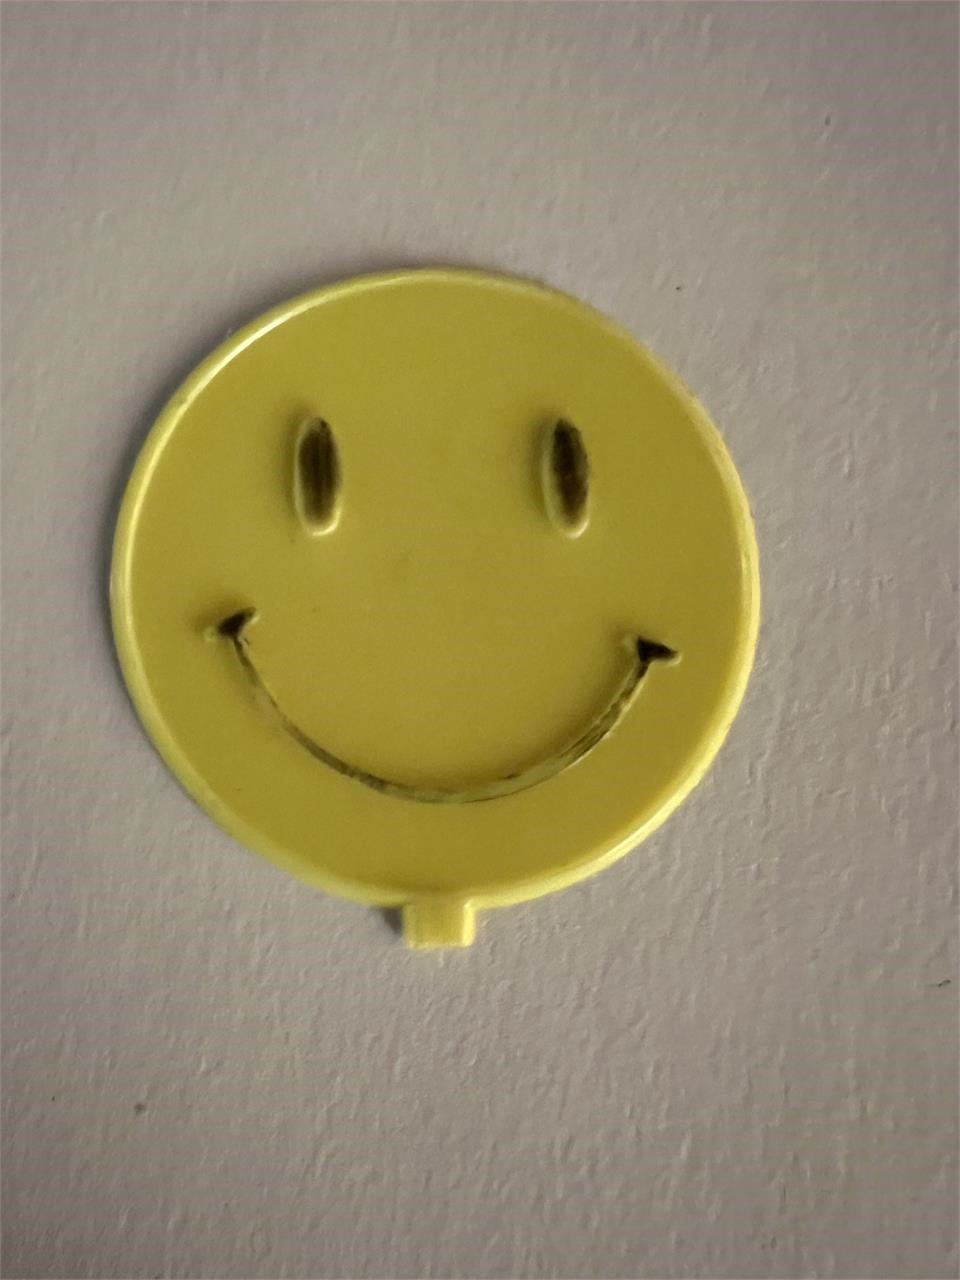 Happy face disc